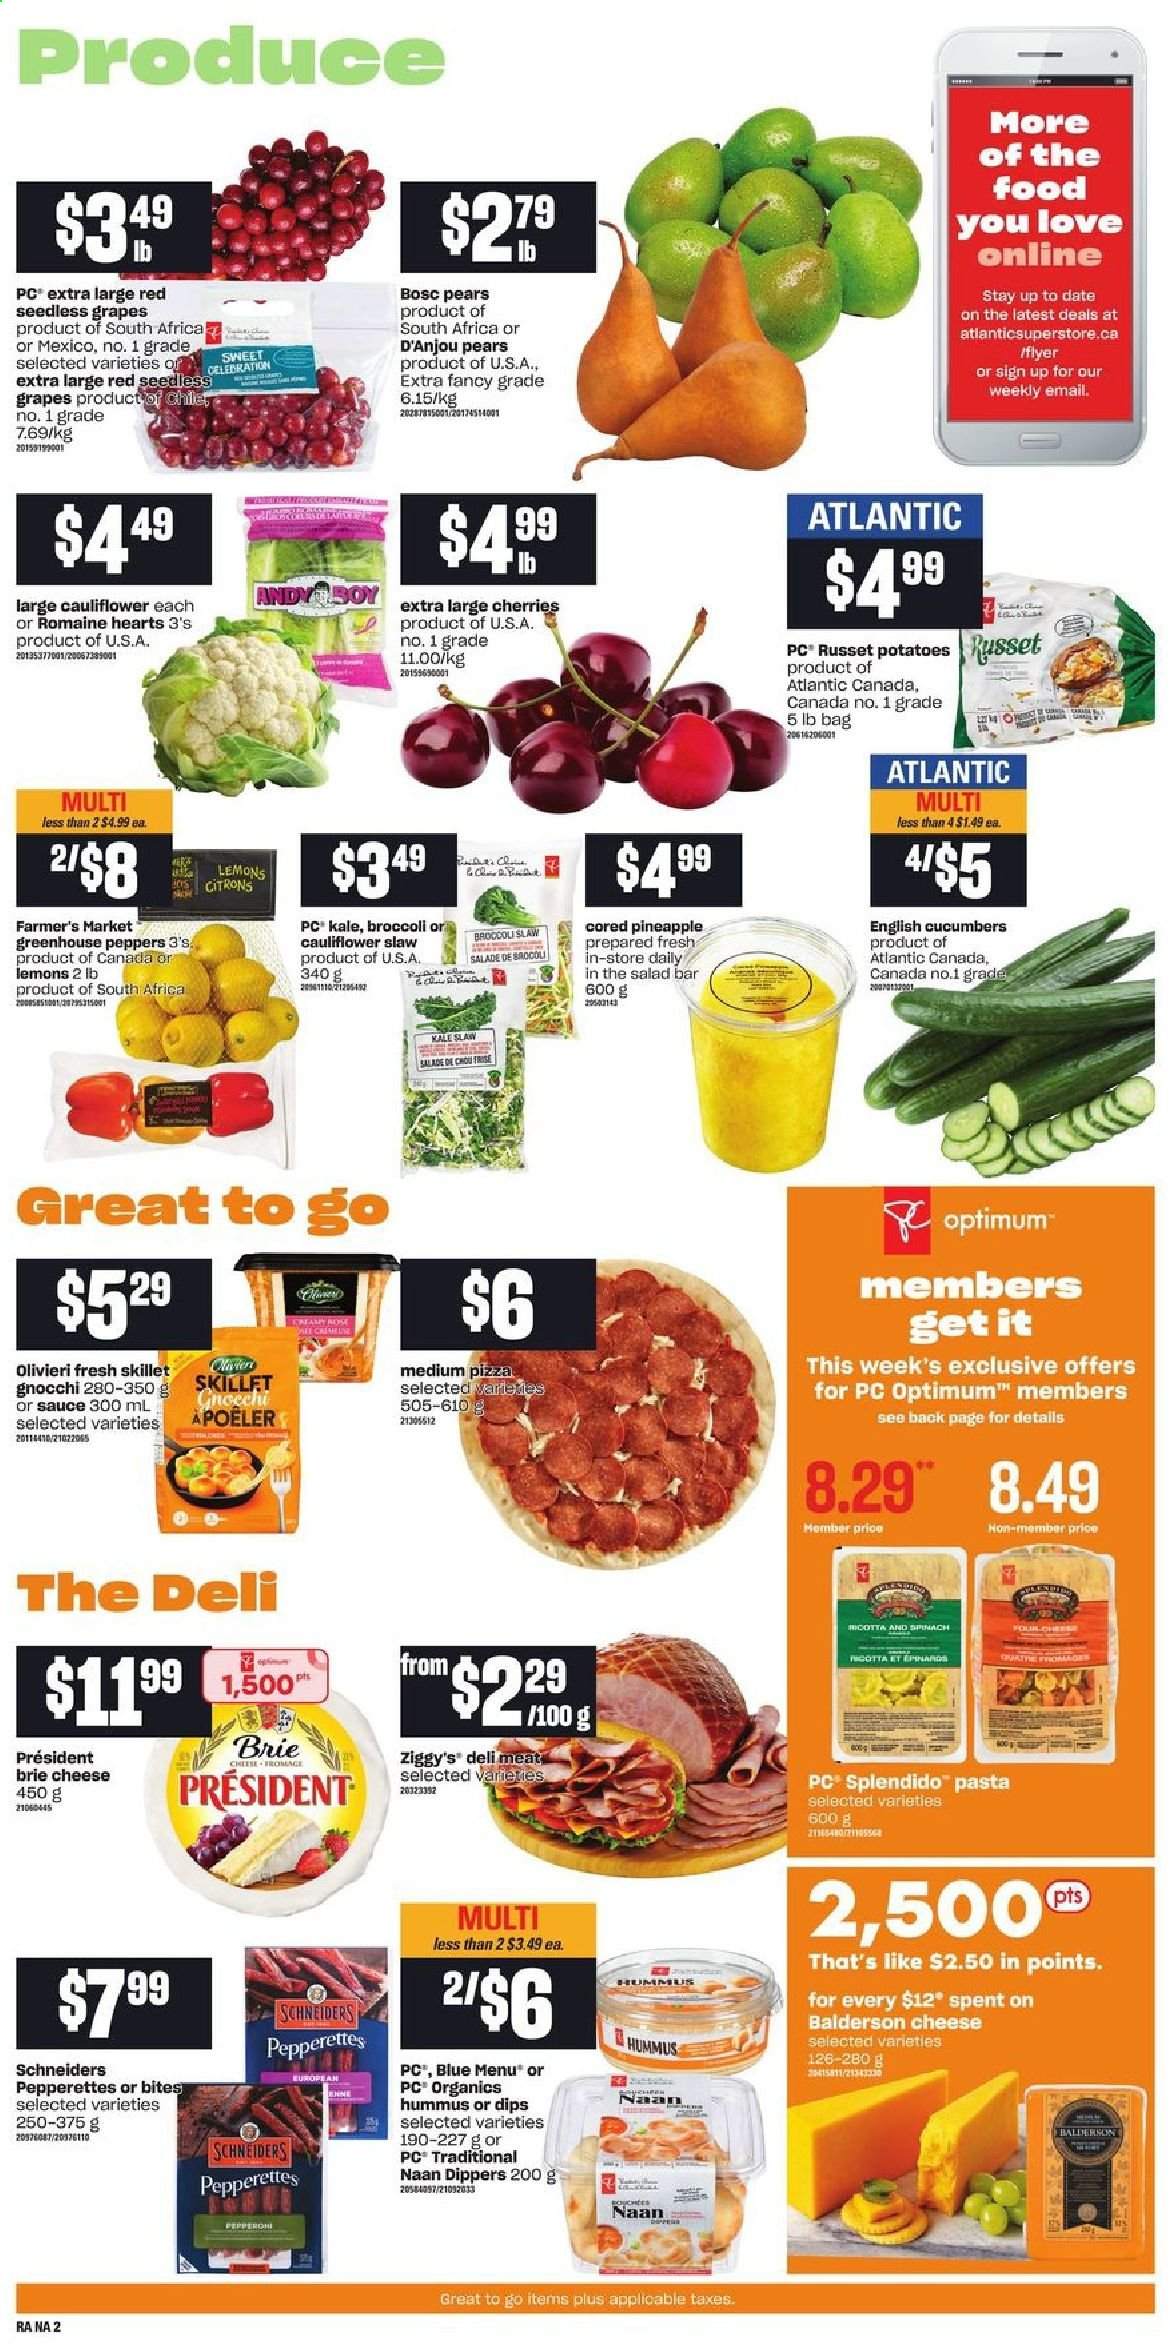 Atlantic Superstore flyer  - May 20, 2021 - May 26, 2021. Page 3.